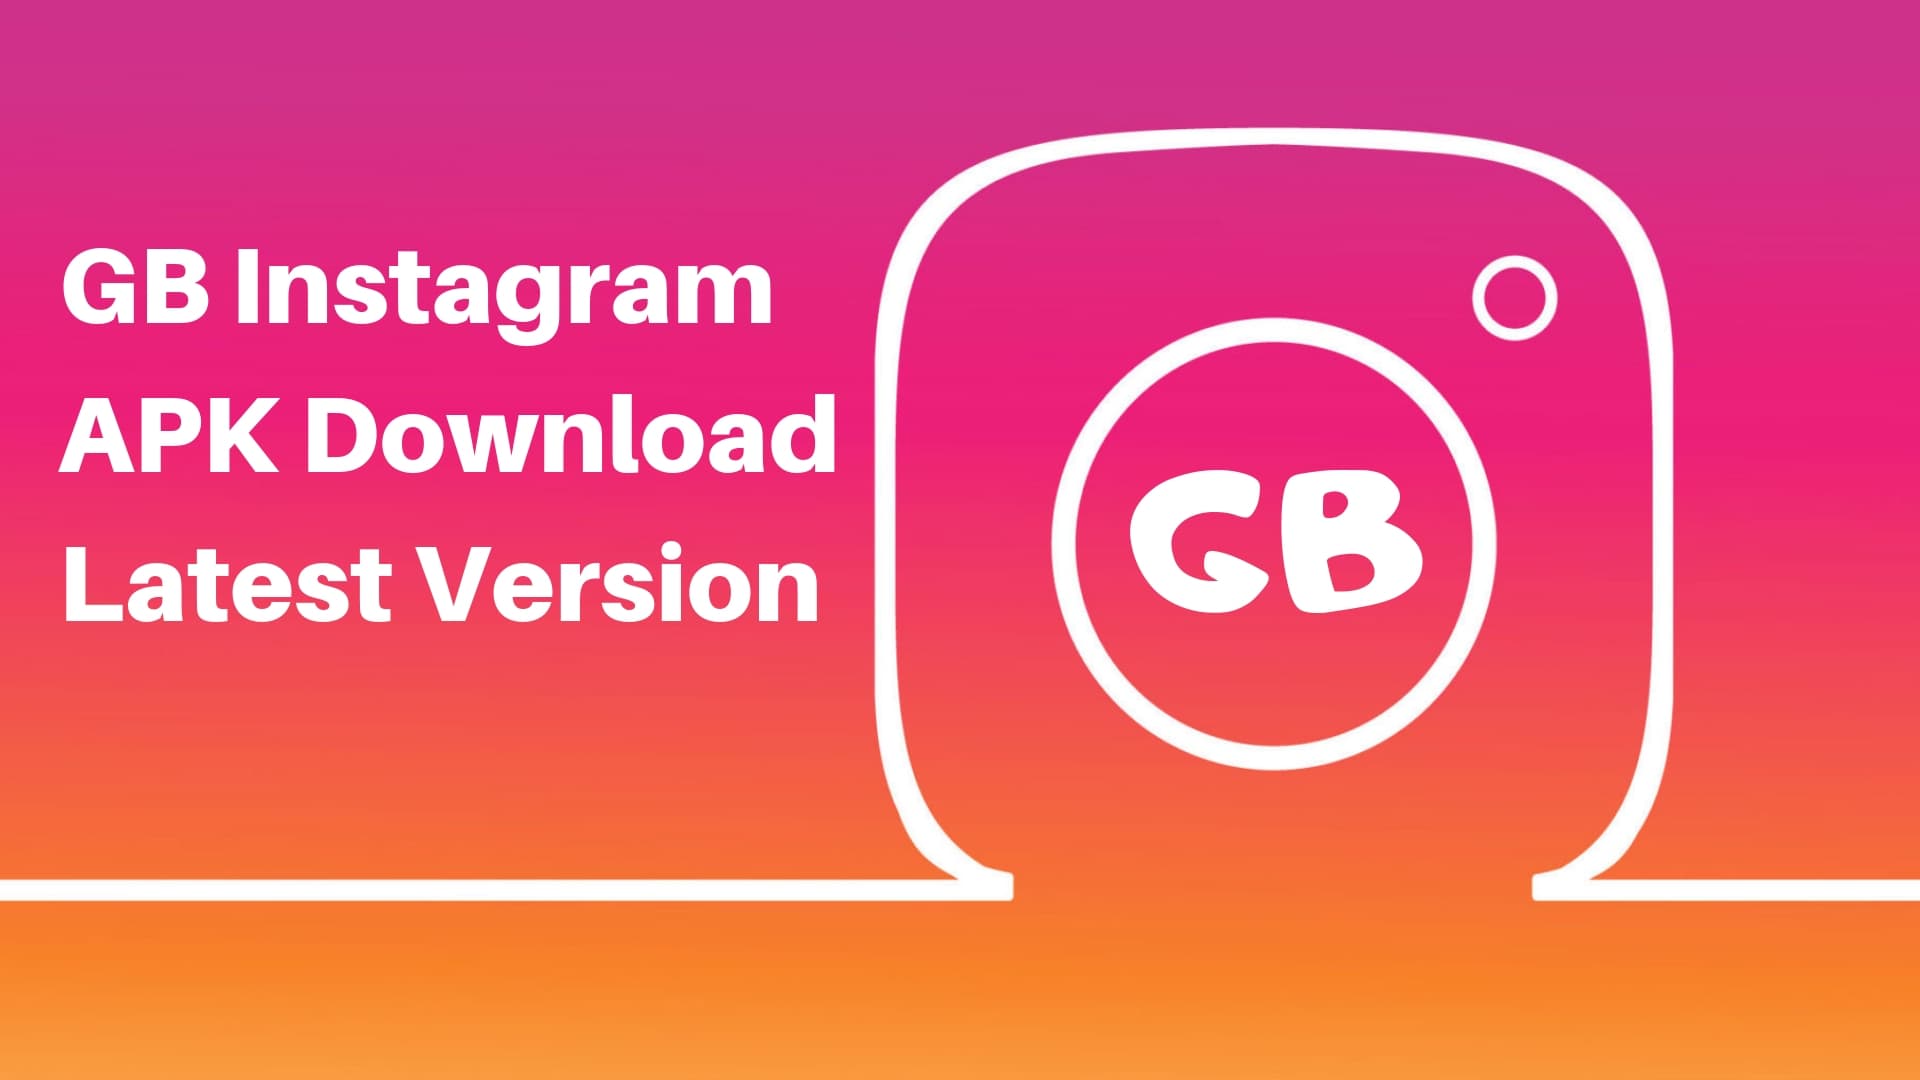 HOW TO INSTALL GB INSTAGRAM FOR ANDROID